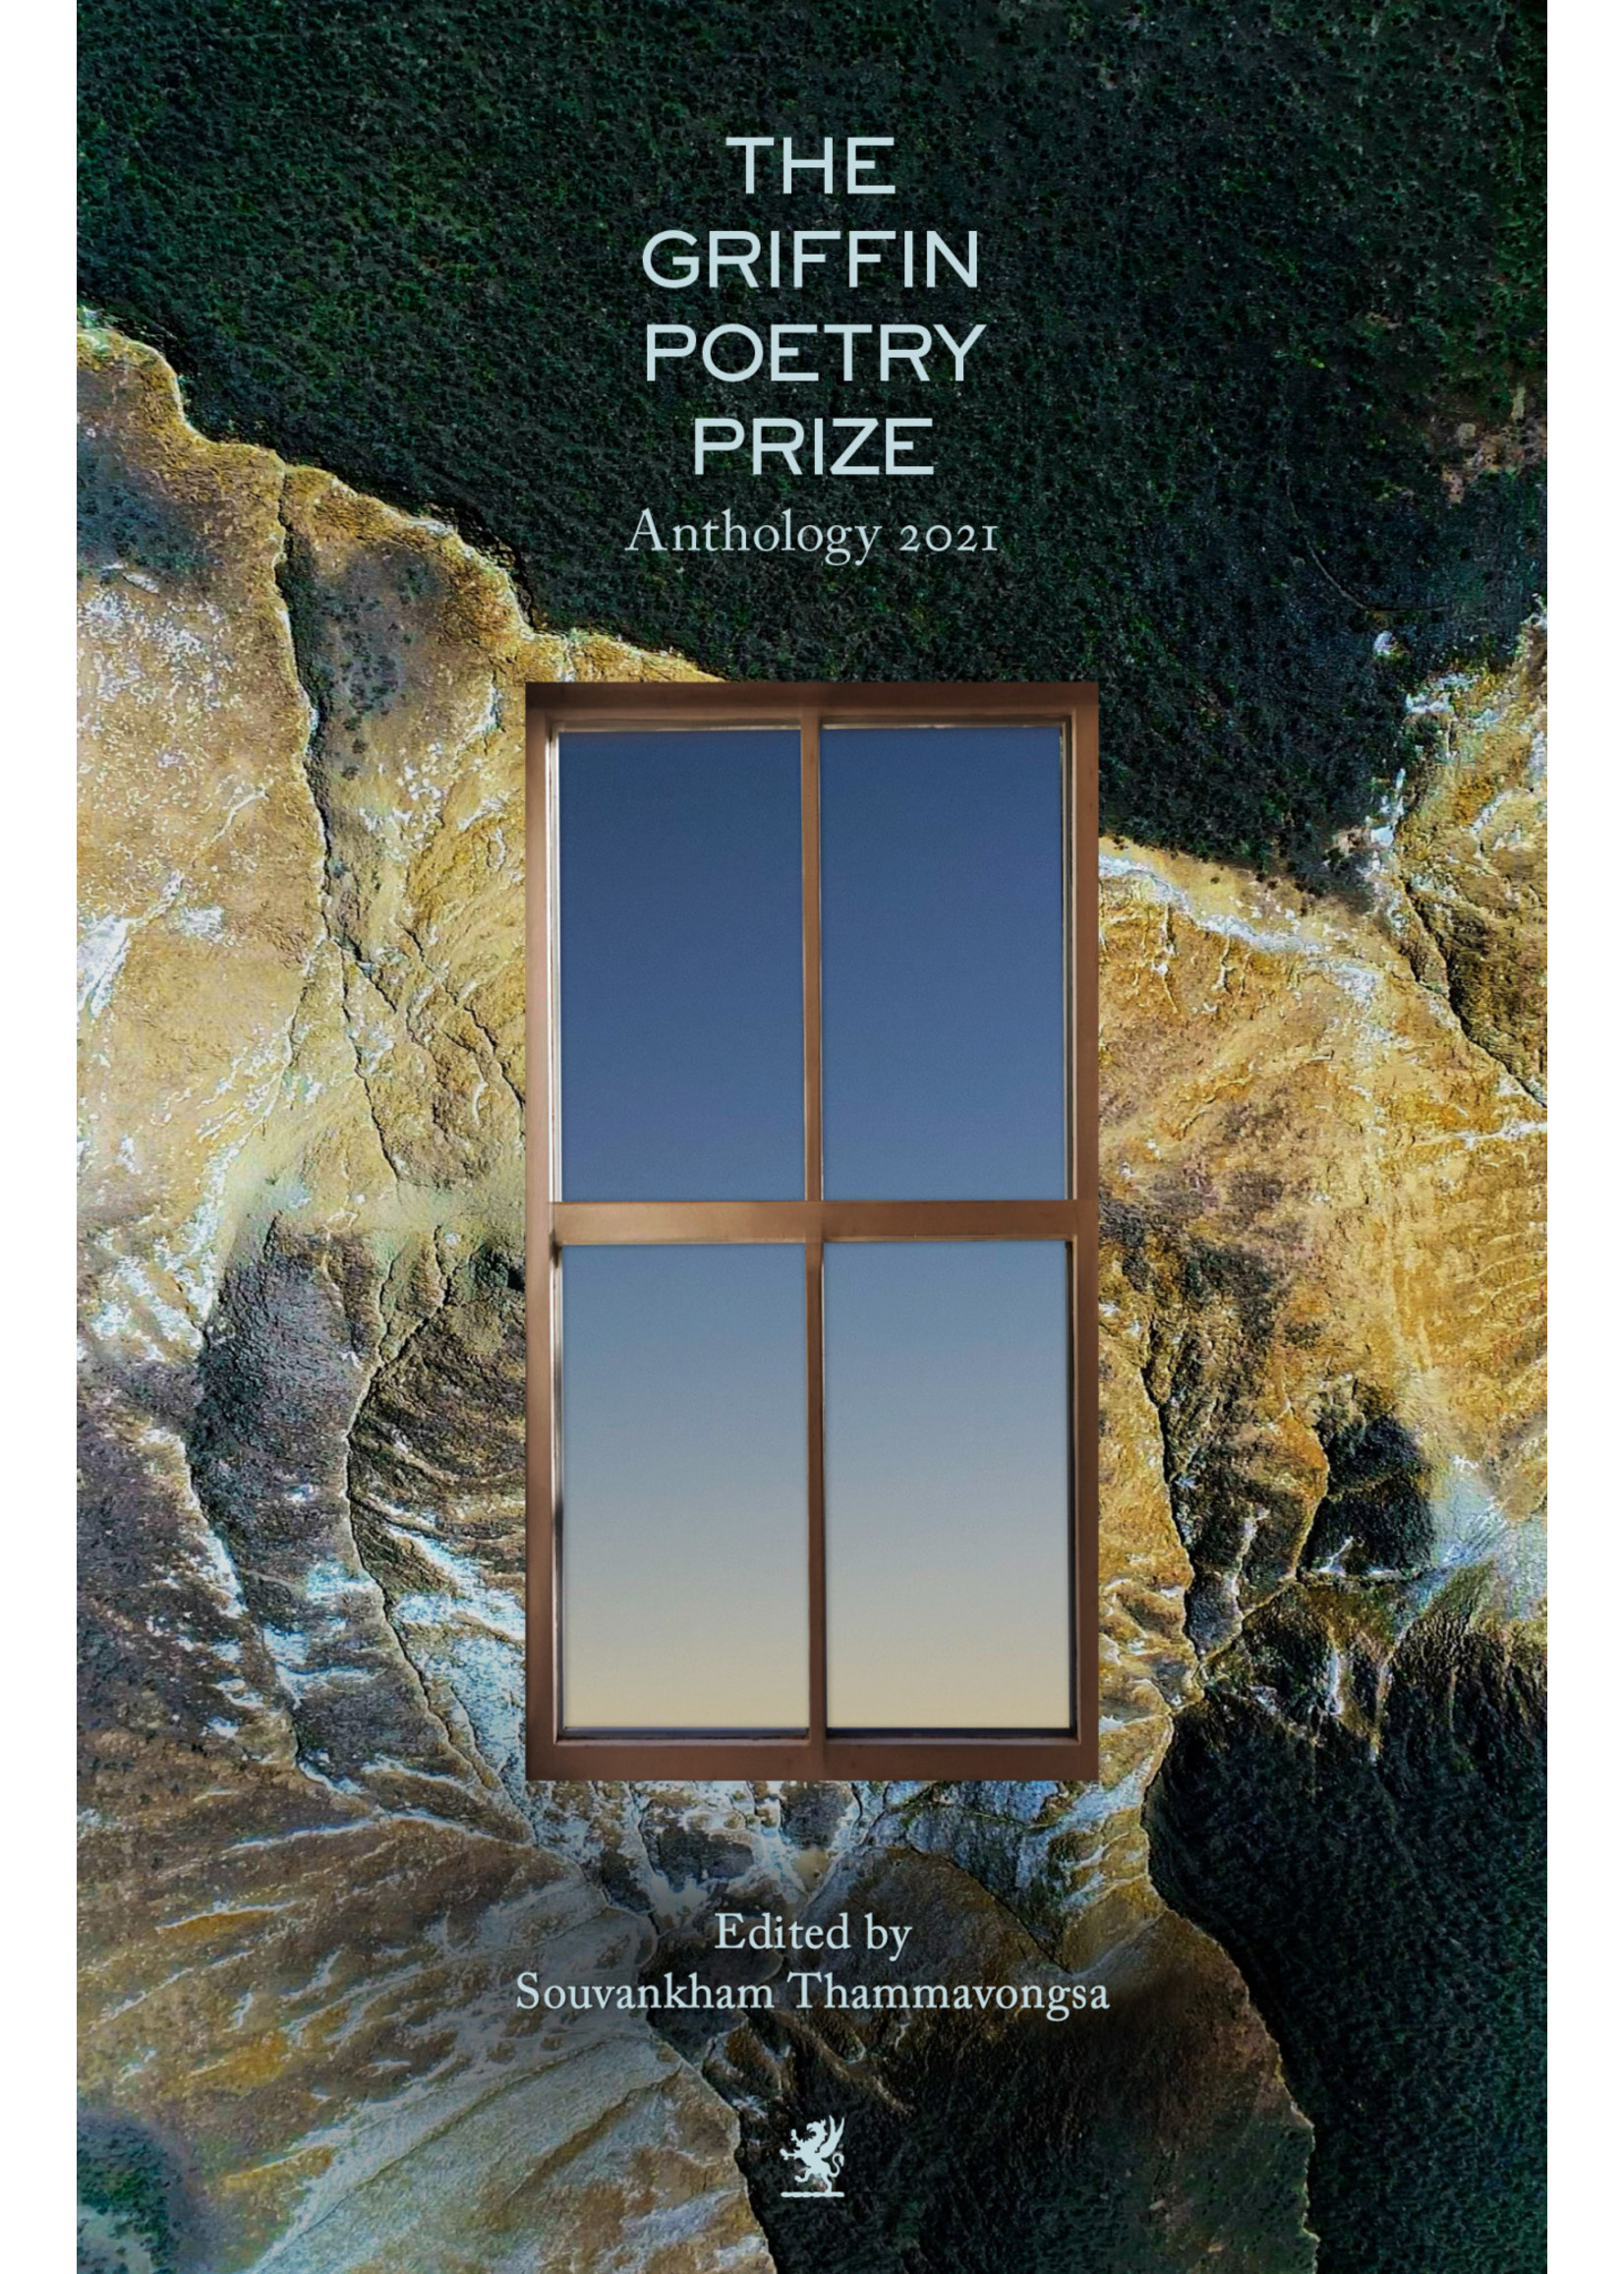 The 2021 Griffin Poetry Prize Anthology: A Selection of the Shortlist by Souvankham Thammavongsa